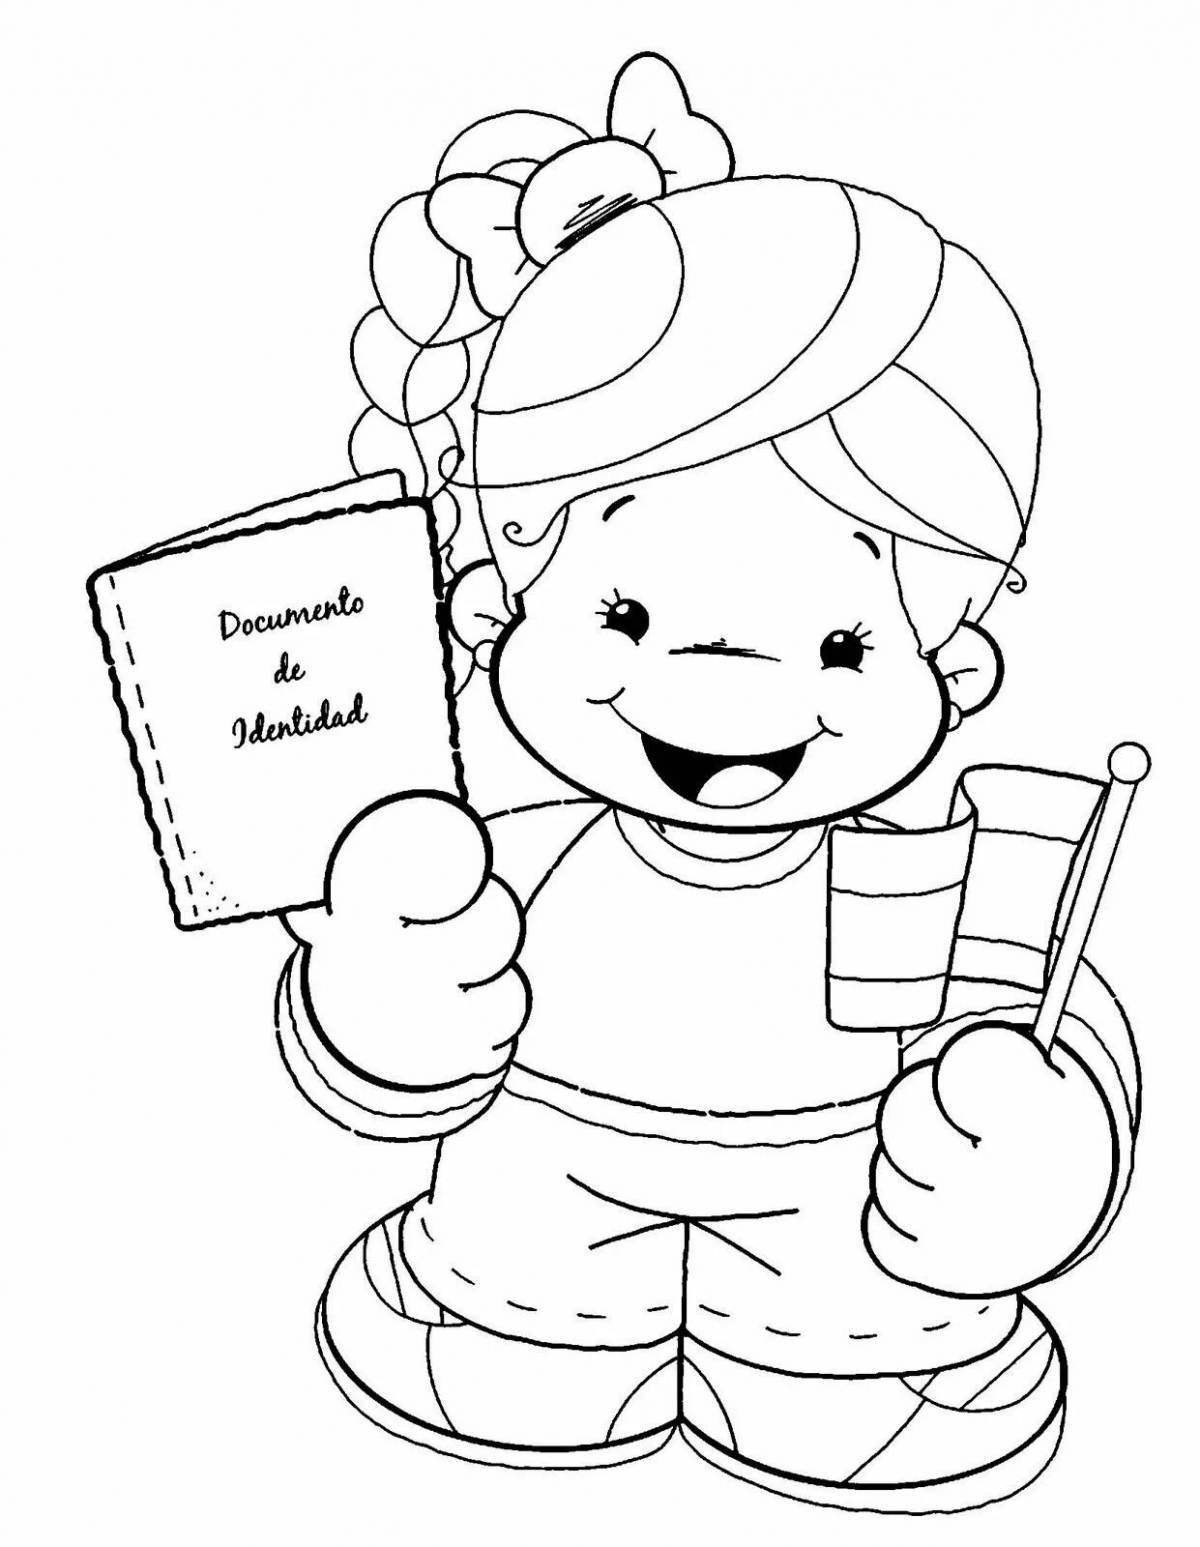 Color-crazy coloring page for children's rights